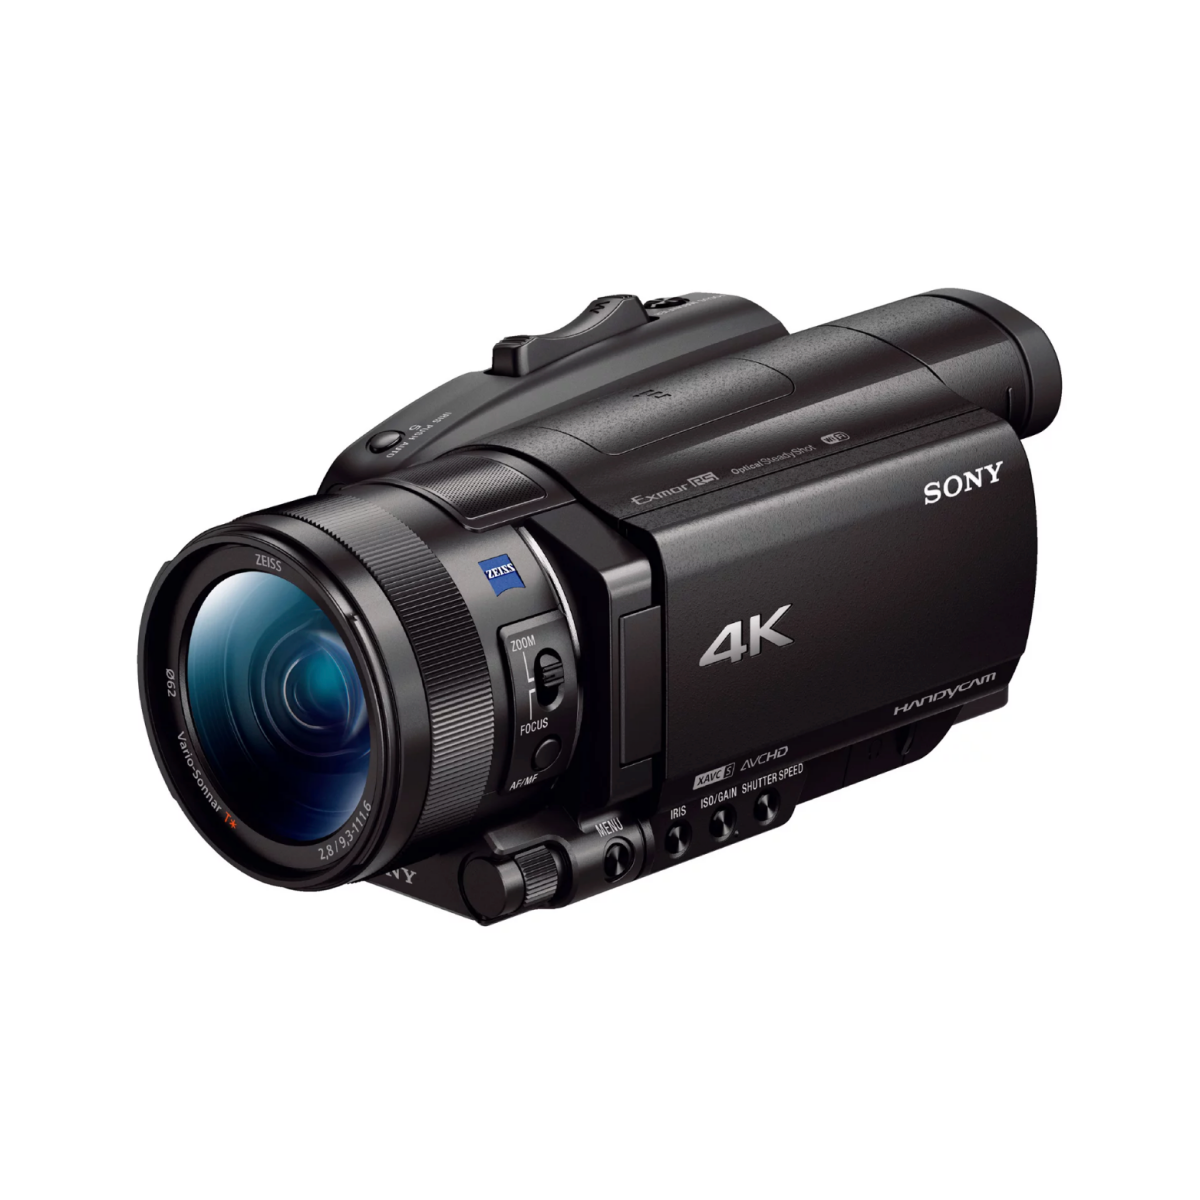 A Sony FDR-AX700/B 4K HDR Camcorder